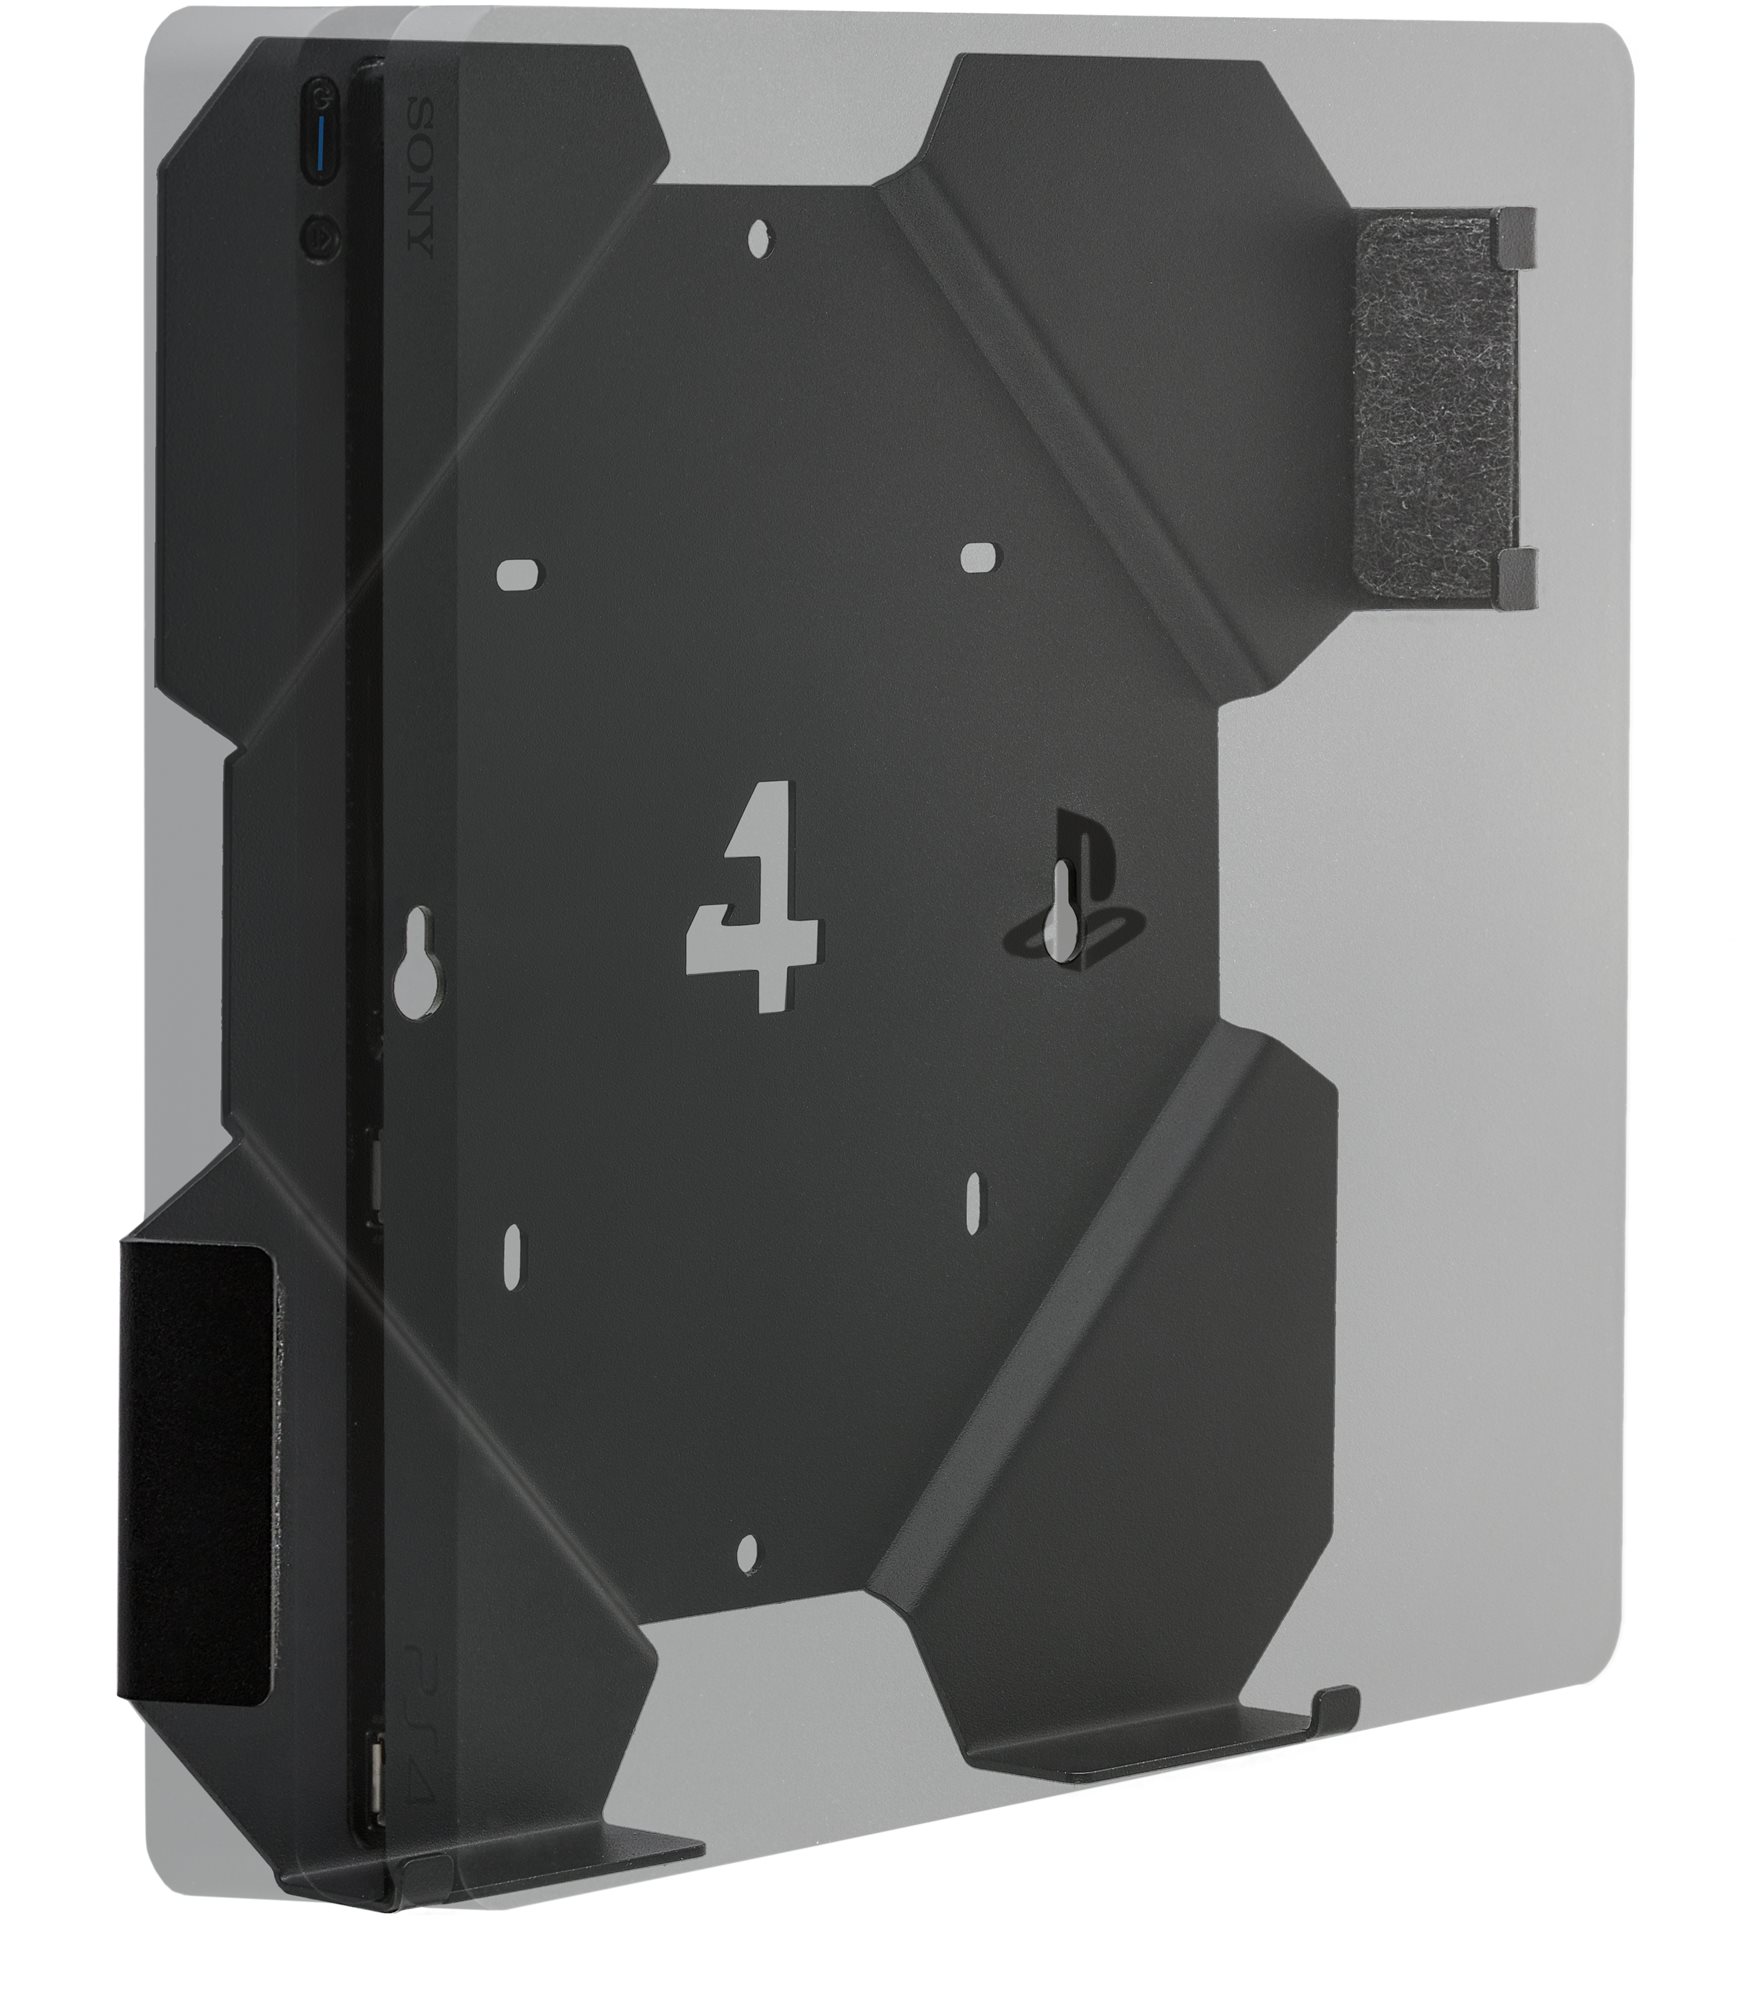 4mount - Wall Mount for PlayStation 4 Slim, fekete